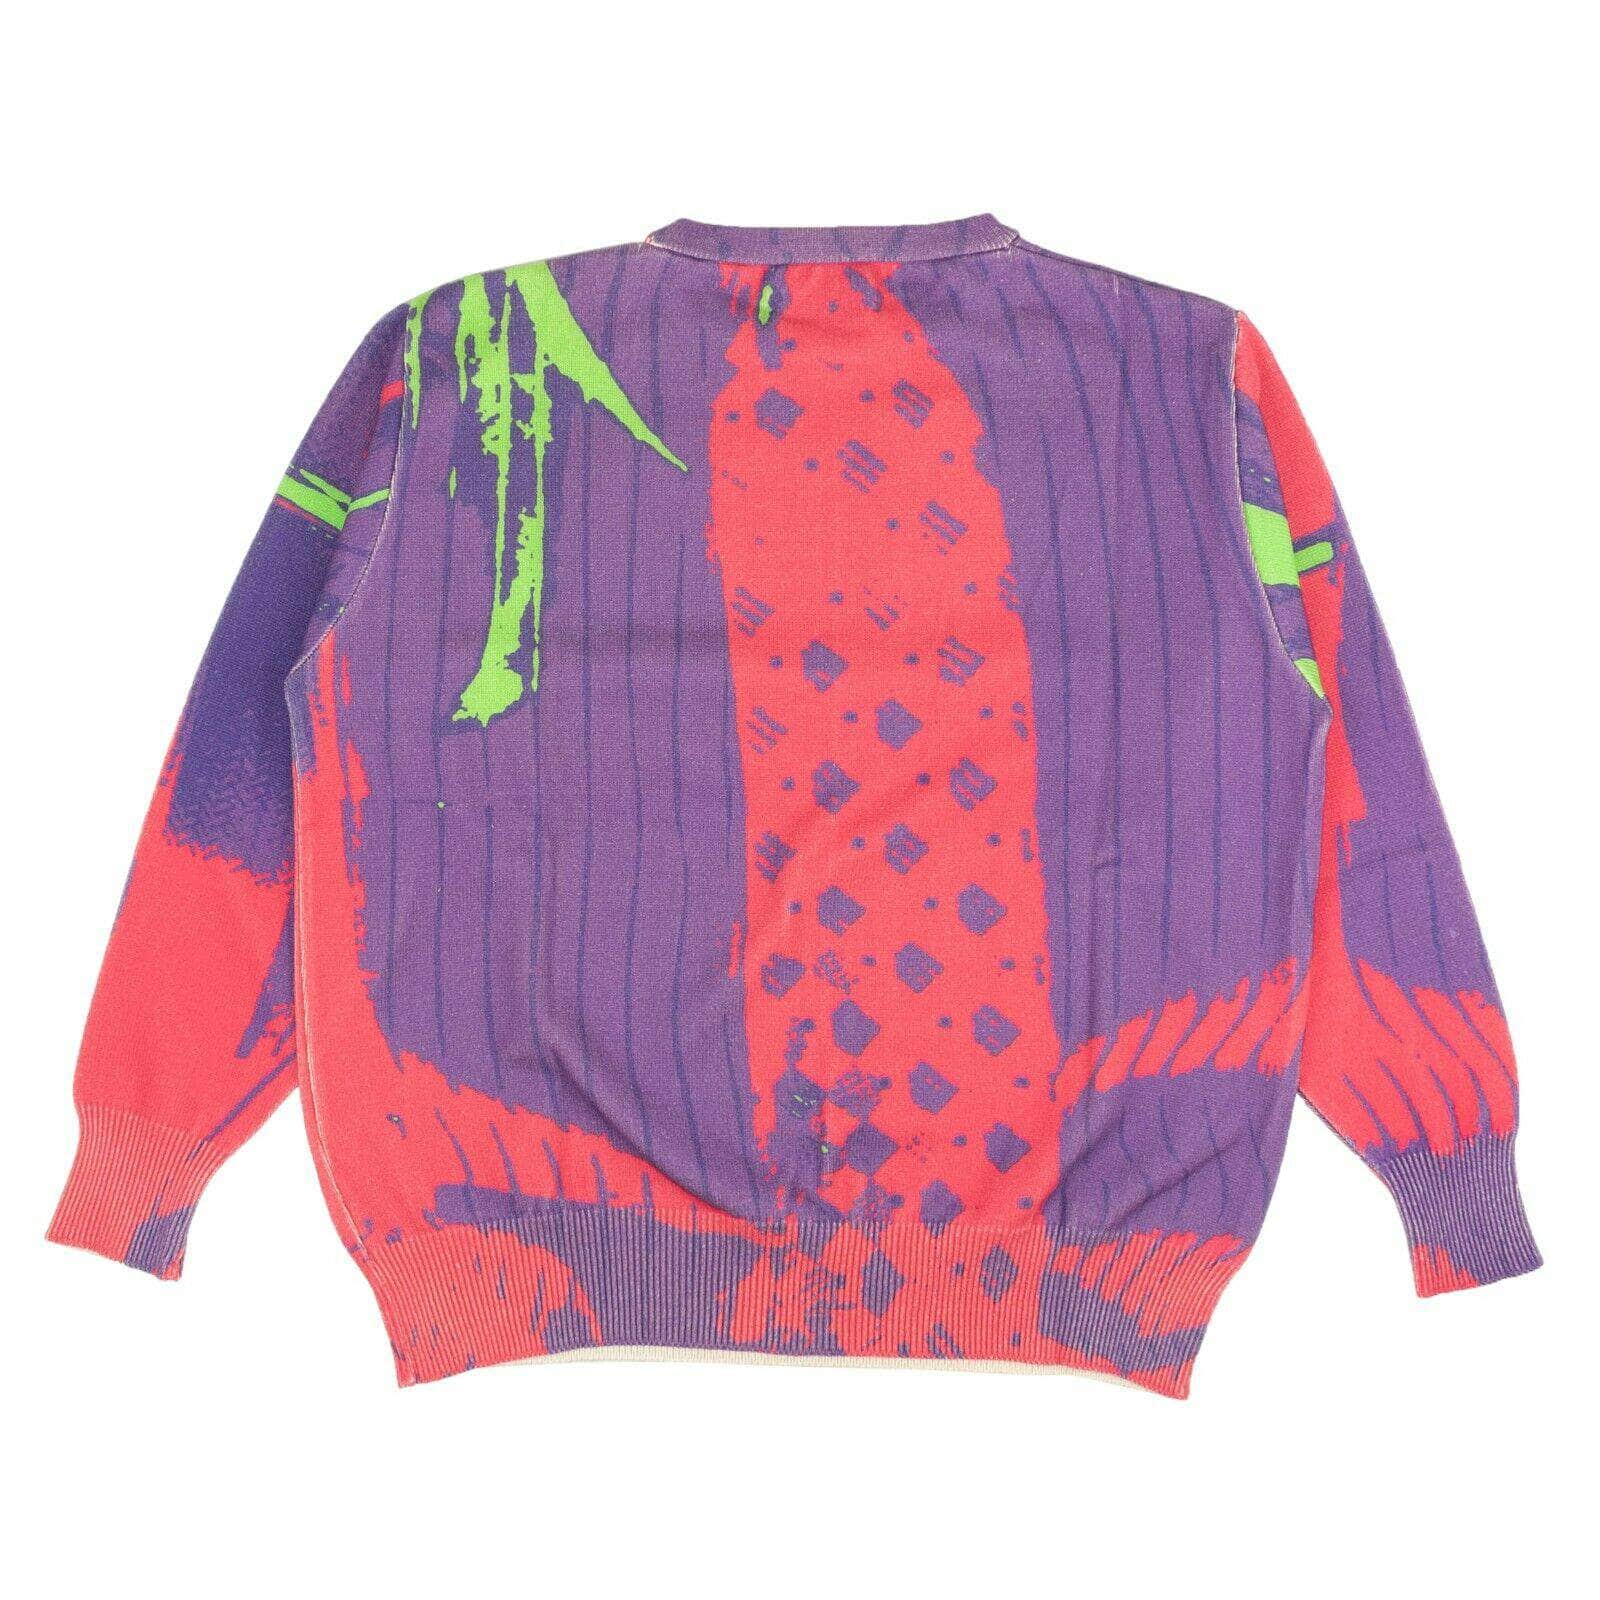 424 ON FAIRFAX 424-on-fairfax, 500-750, channelenable-all, chicmi, couponcollection, gender-mens, main-clothing, mens-crewnecks, mens-shoes, size-l, size-m, size-s Purple And Pink Business Print Crewneck